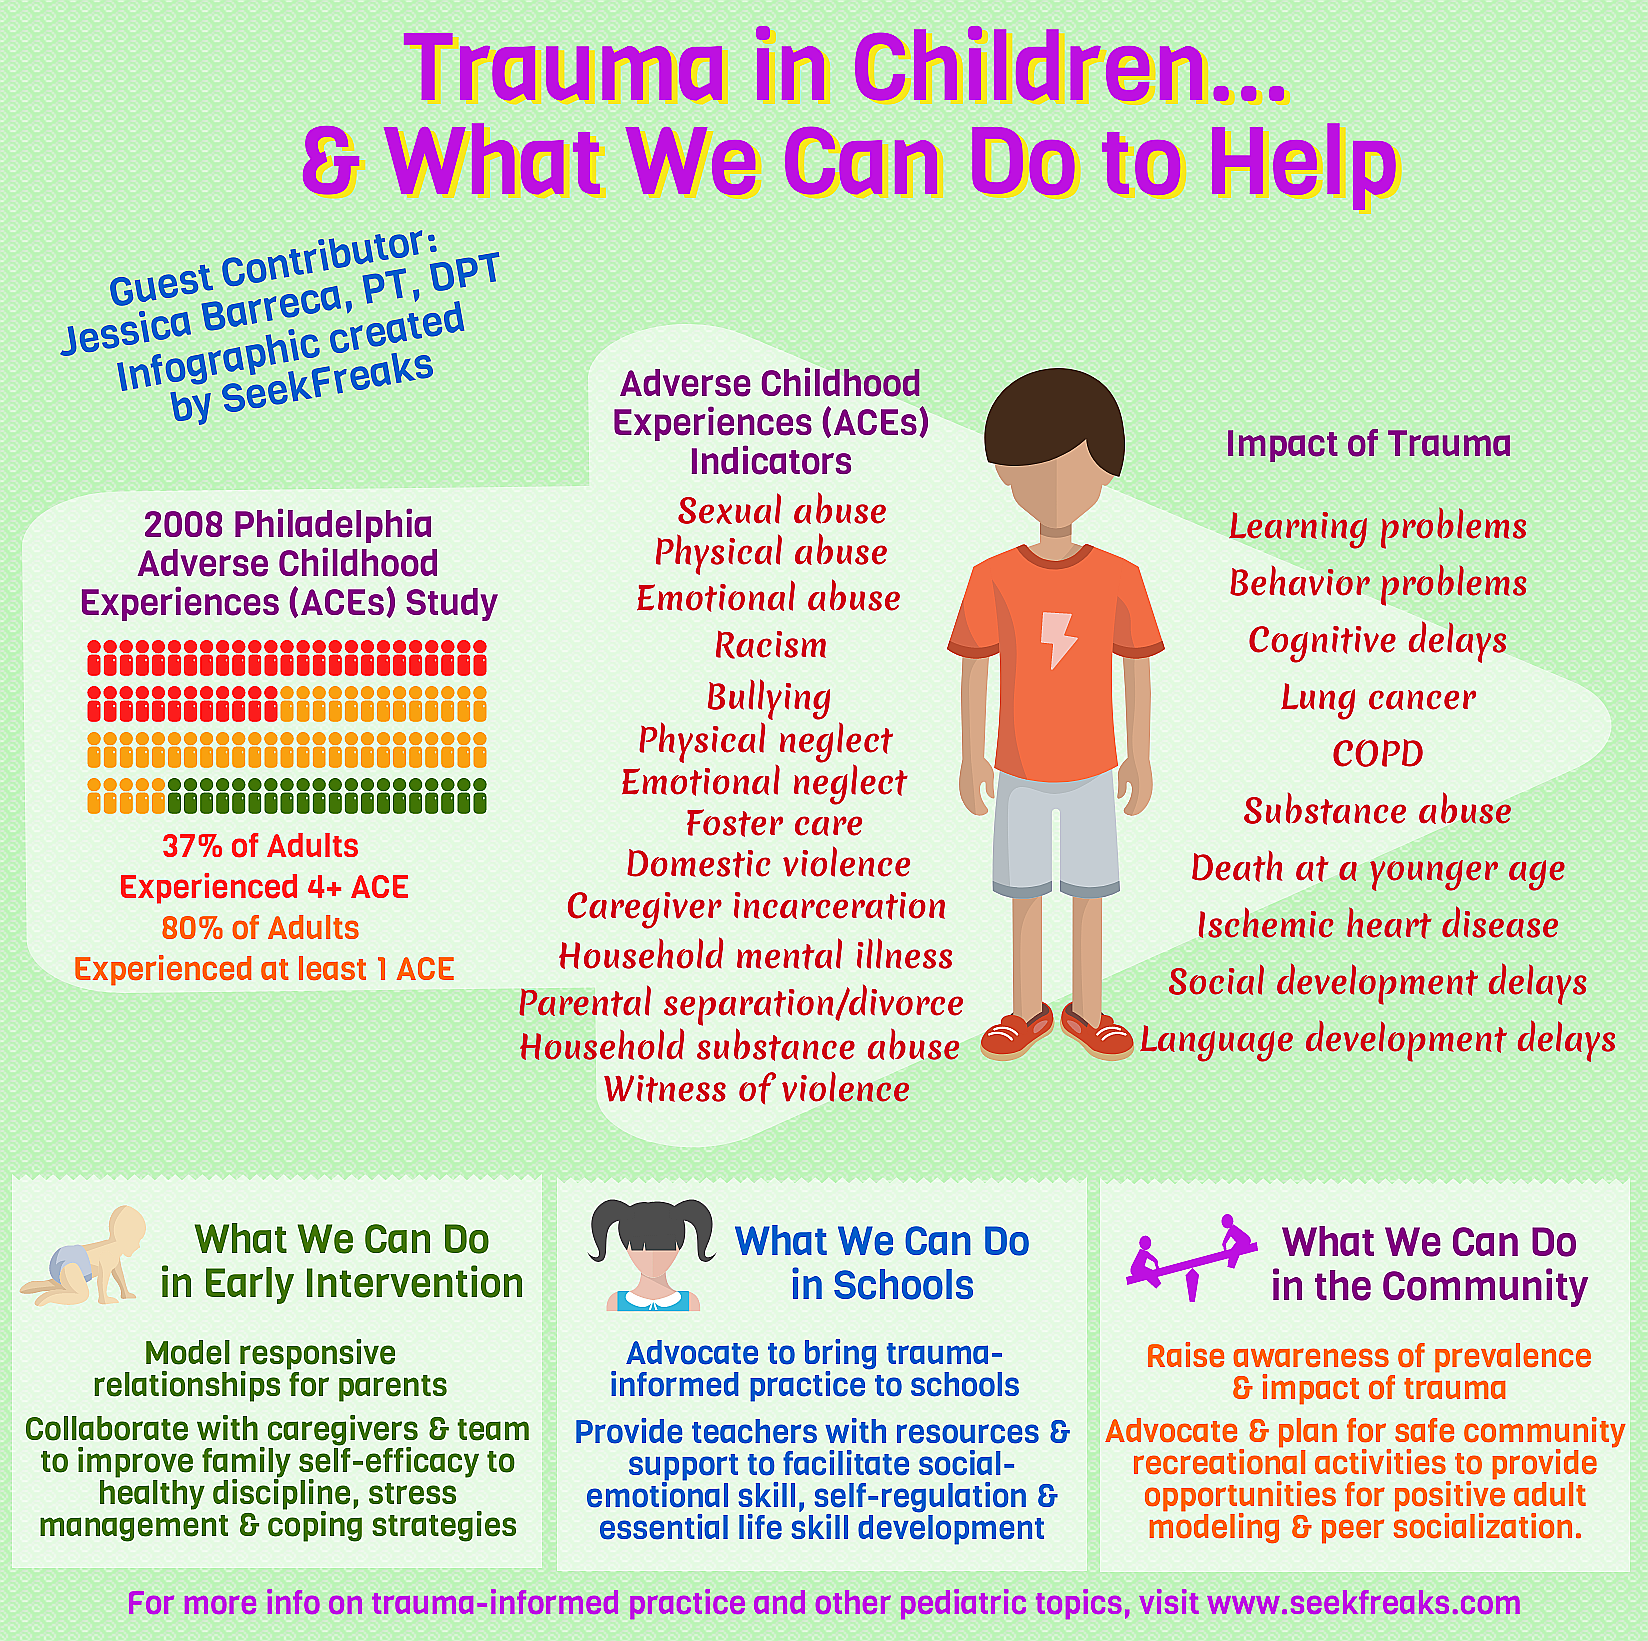 Psychological Trauma in children. Mental illness. Childhood Trauma. Children's Mental Health. A little experience